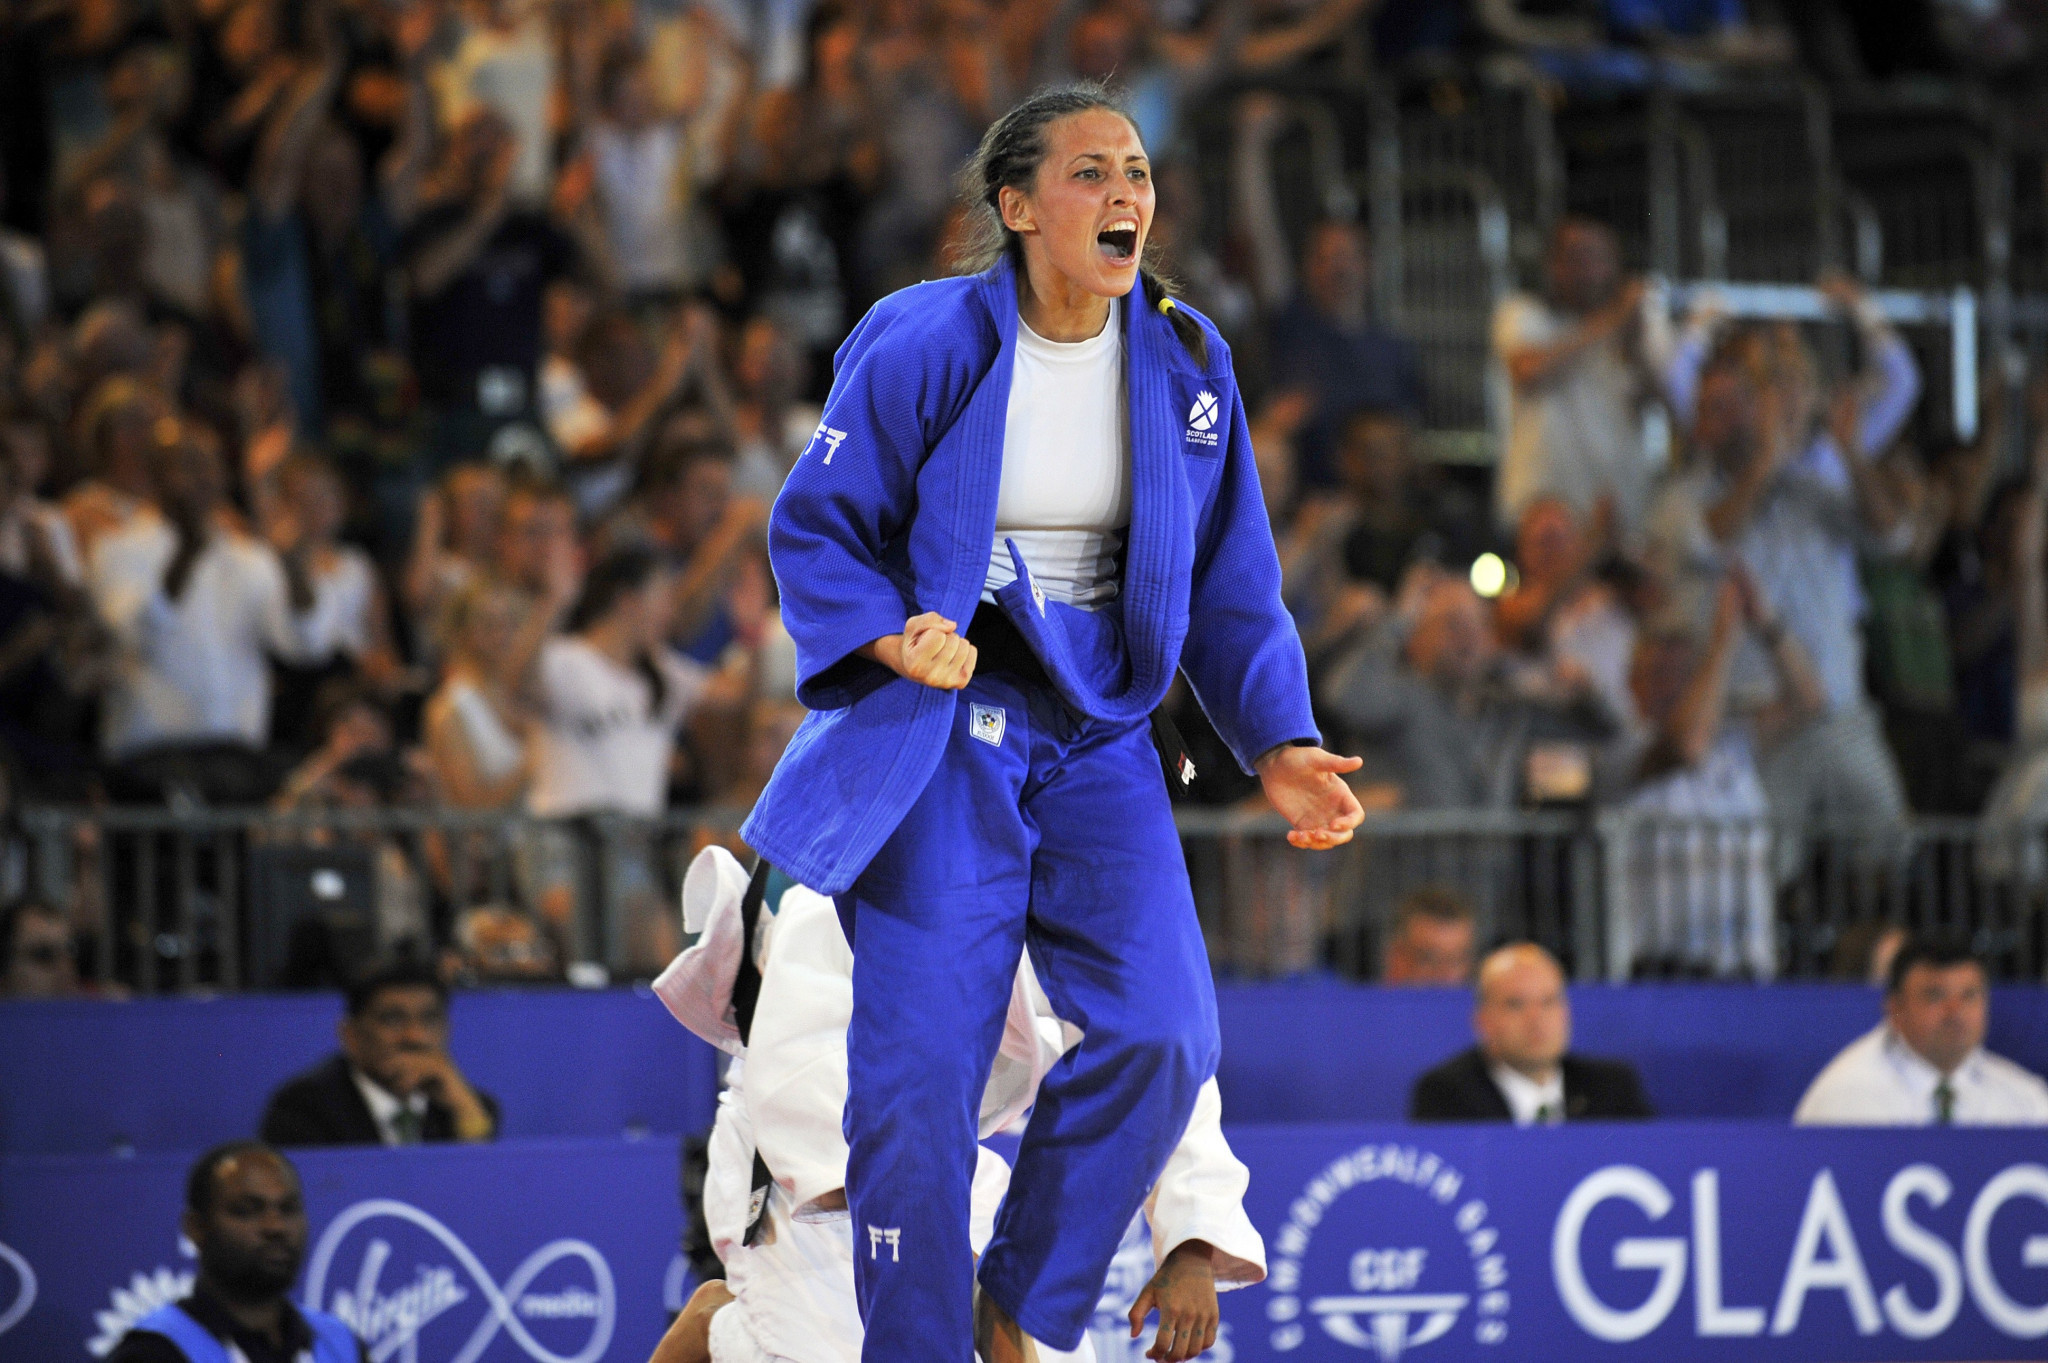 Judo is set to feature at the Commonwealth Games for the first time since Glasgow 2014 when Scotland's Kimberley Renicks starred ©Getty Images 